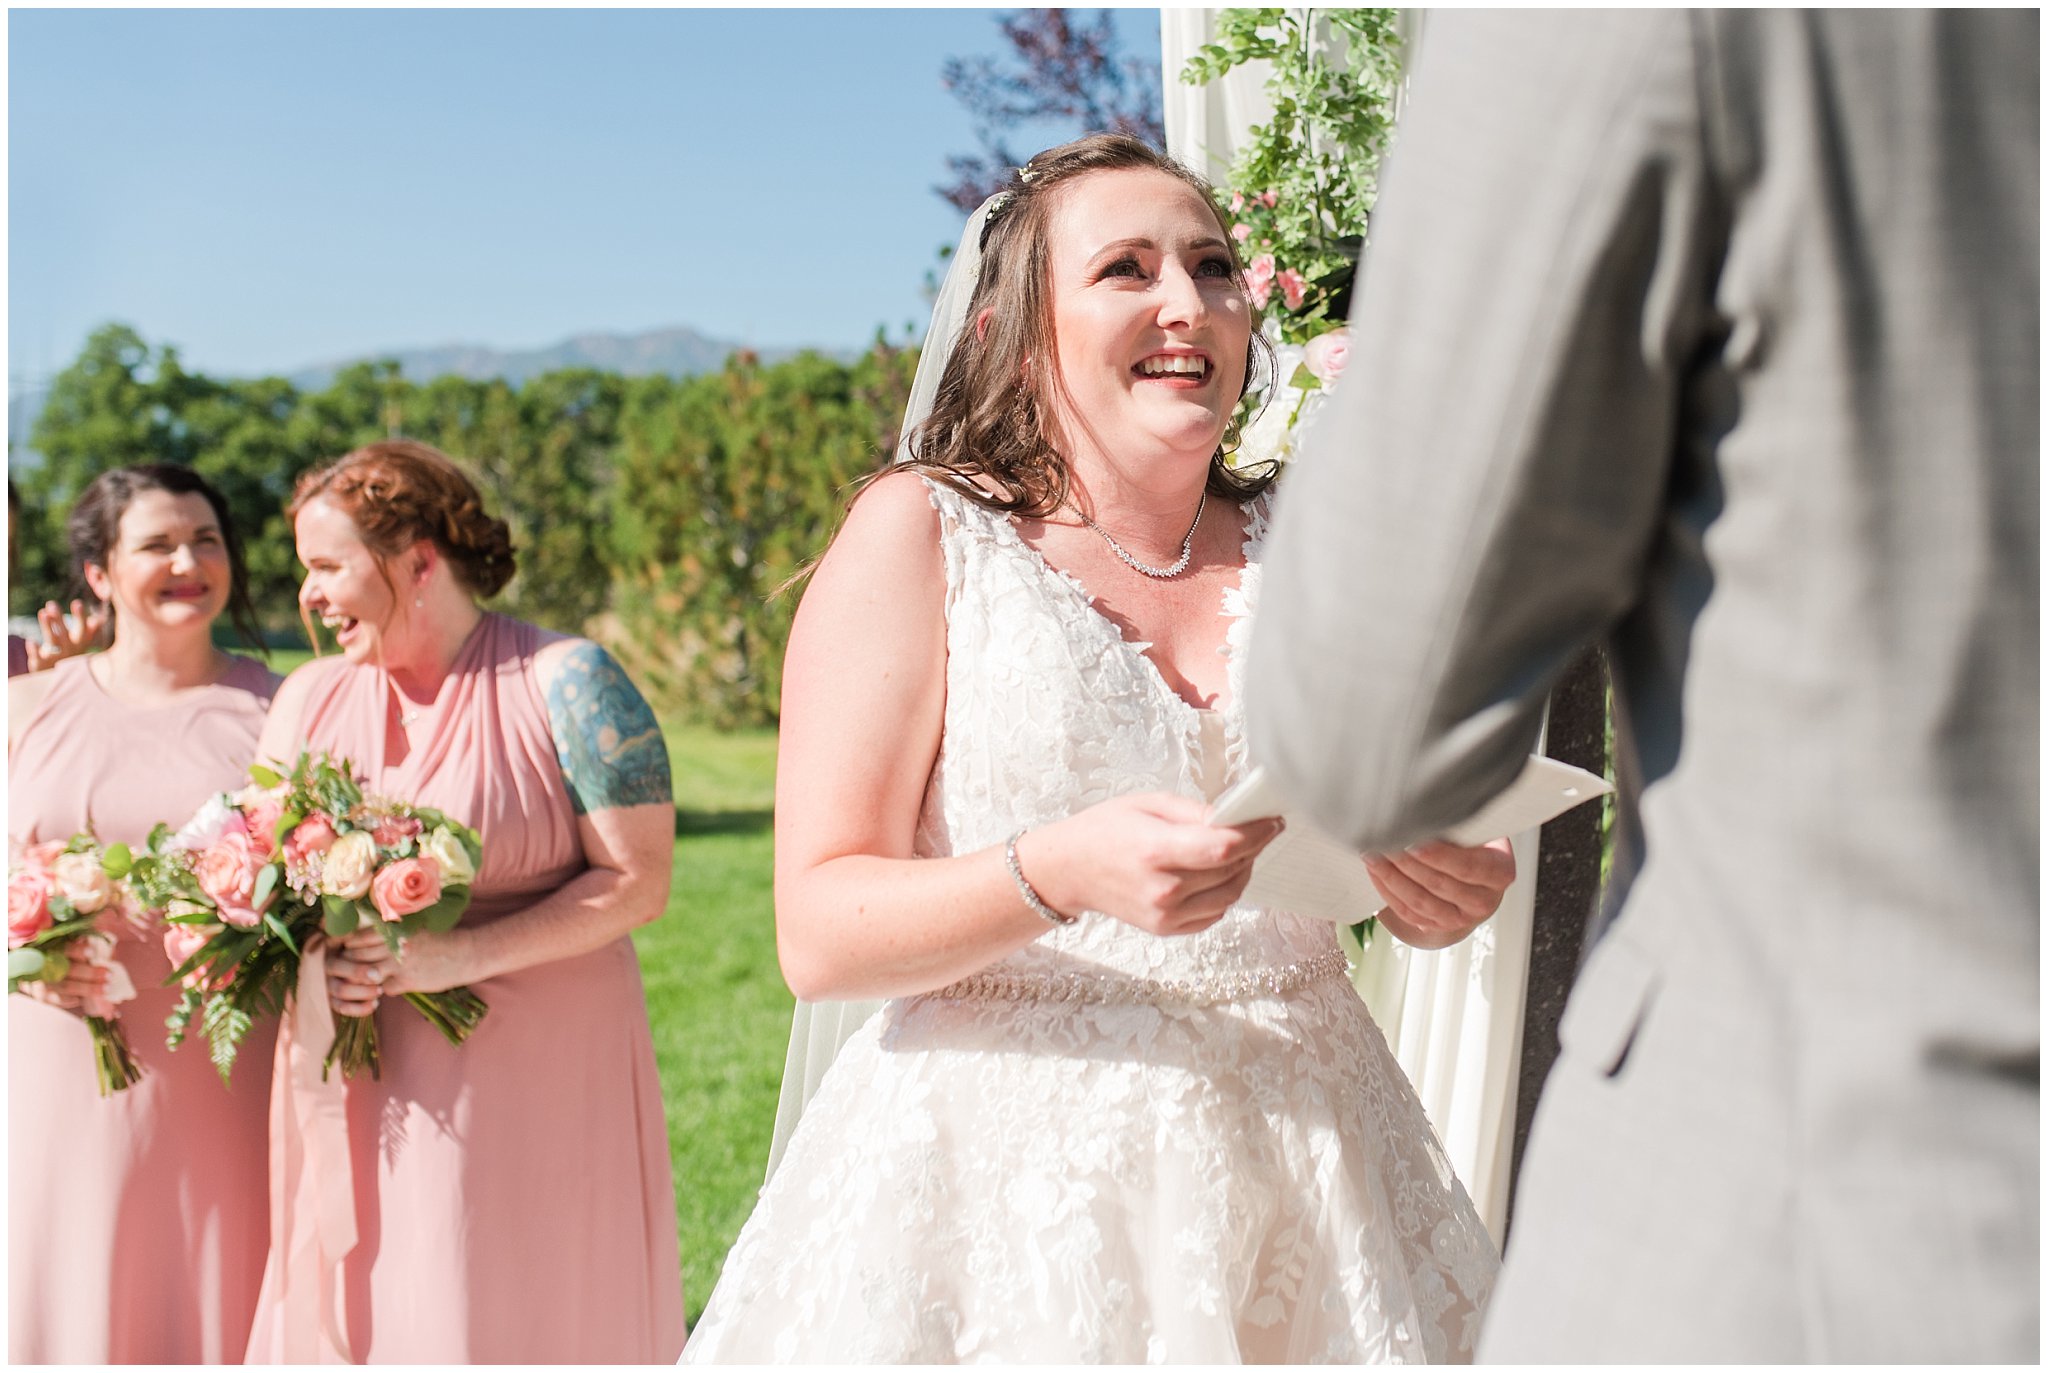 Bride reads vows during ceremony | Oak Hills Utah Dusty Rose and Gray Summer Wedding | Jessie and Dallin Photography